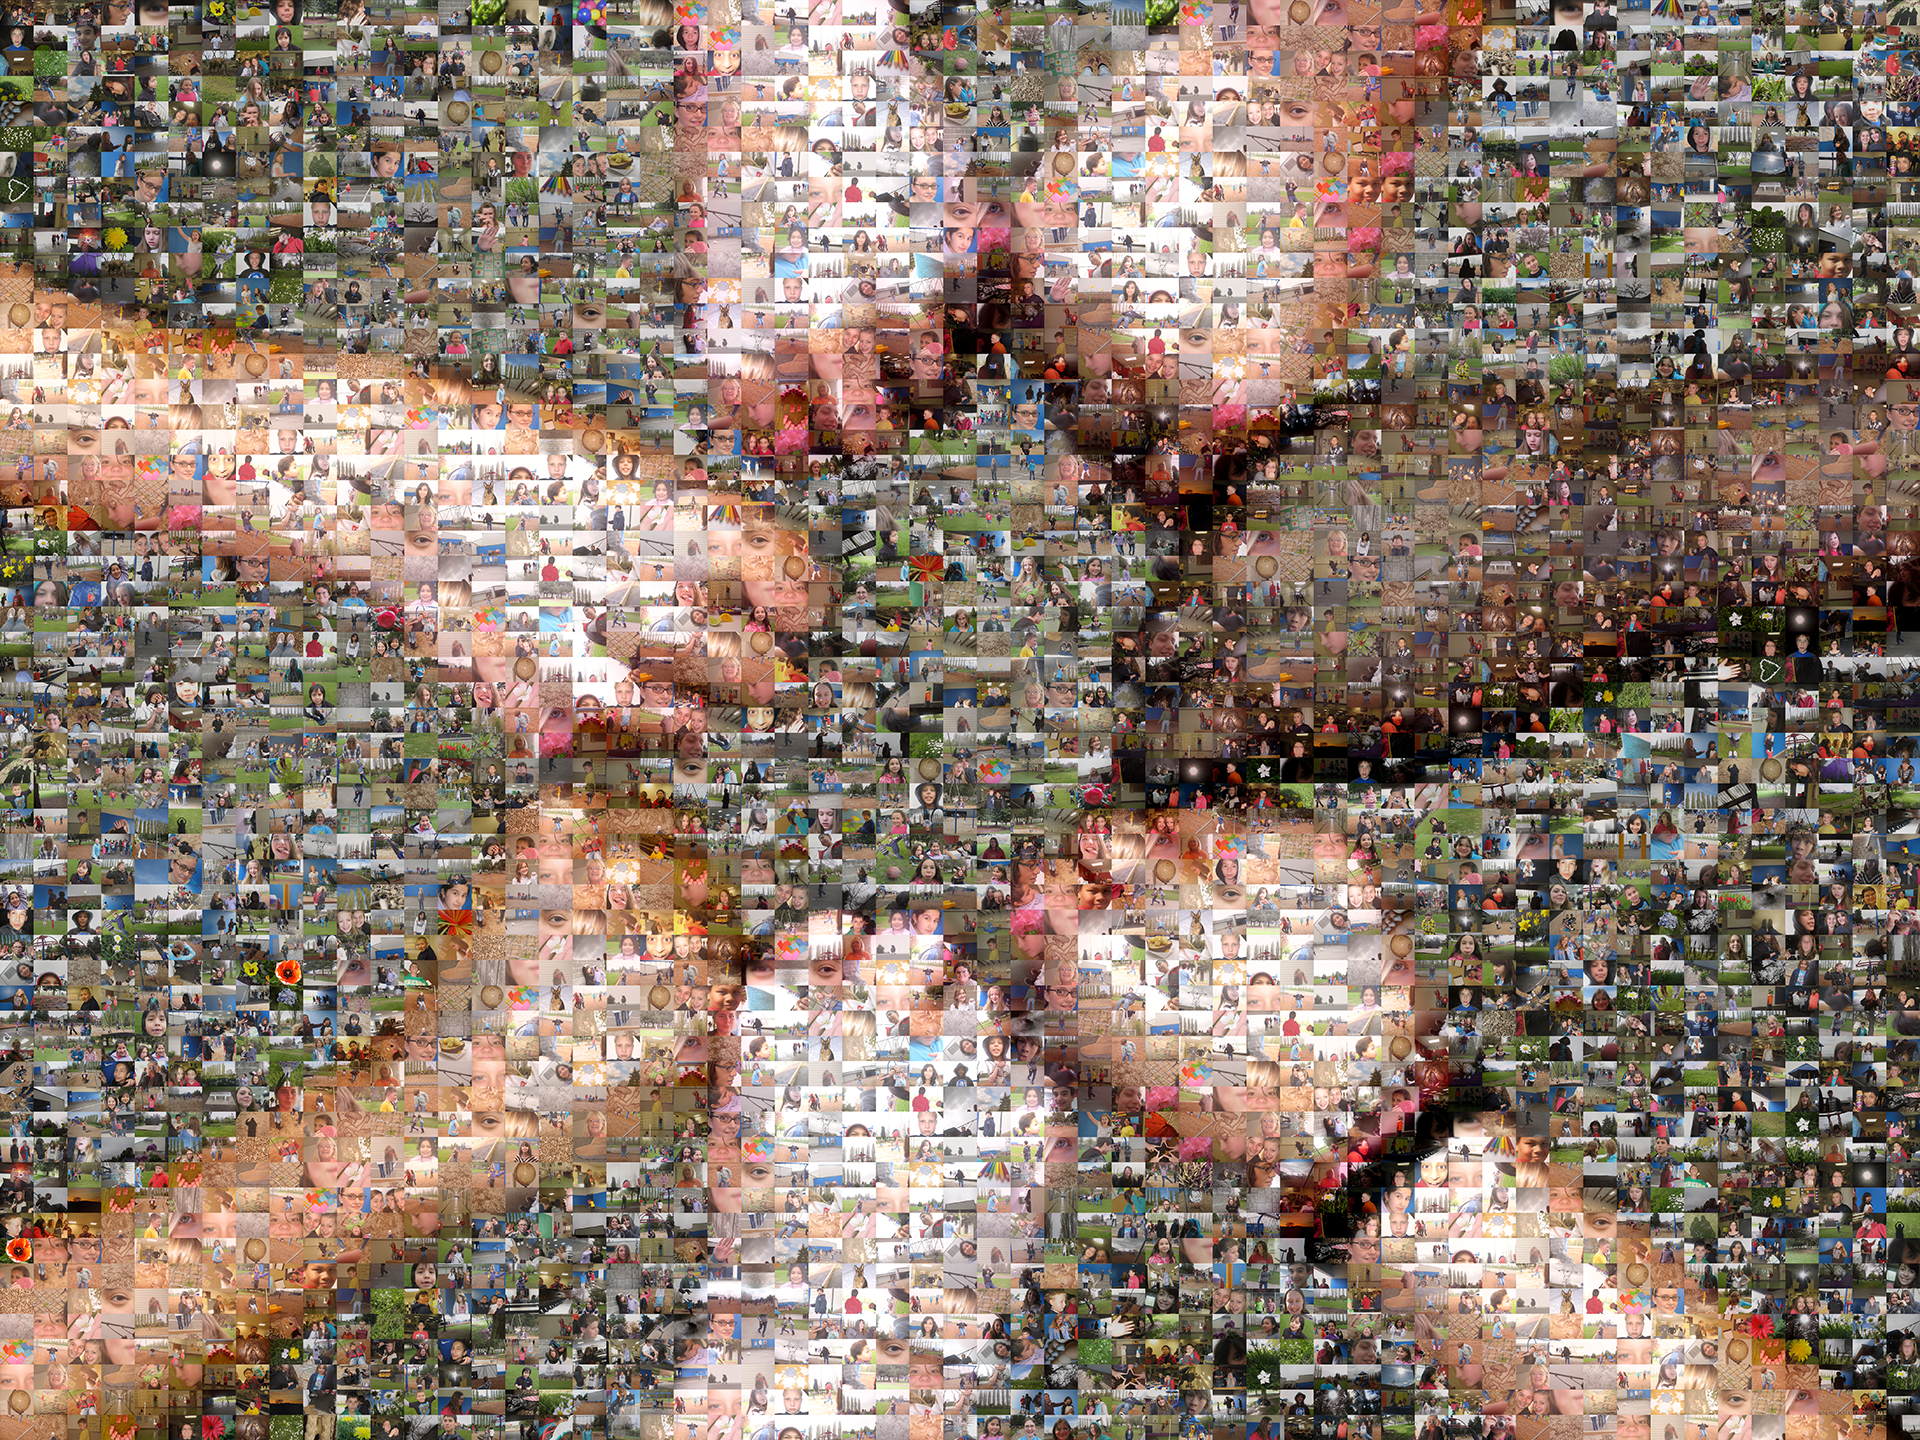 photo mosaic a school project using 872 photos taken by the students